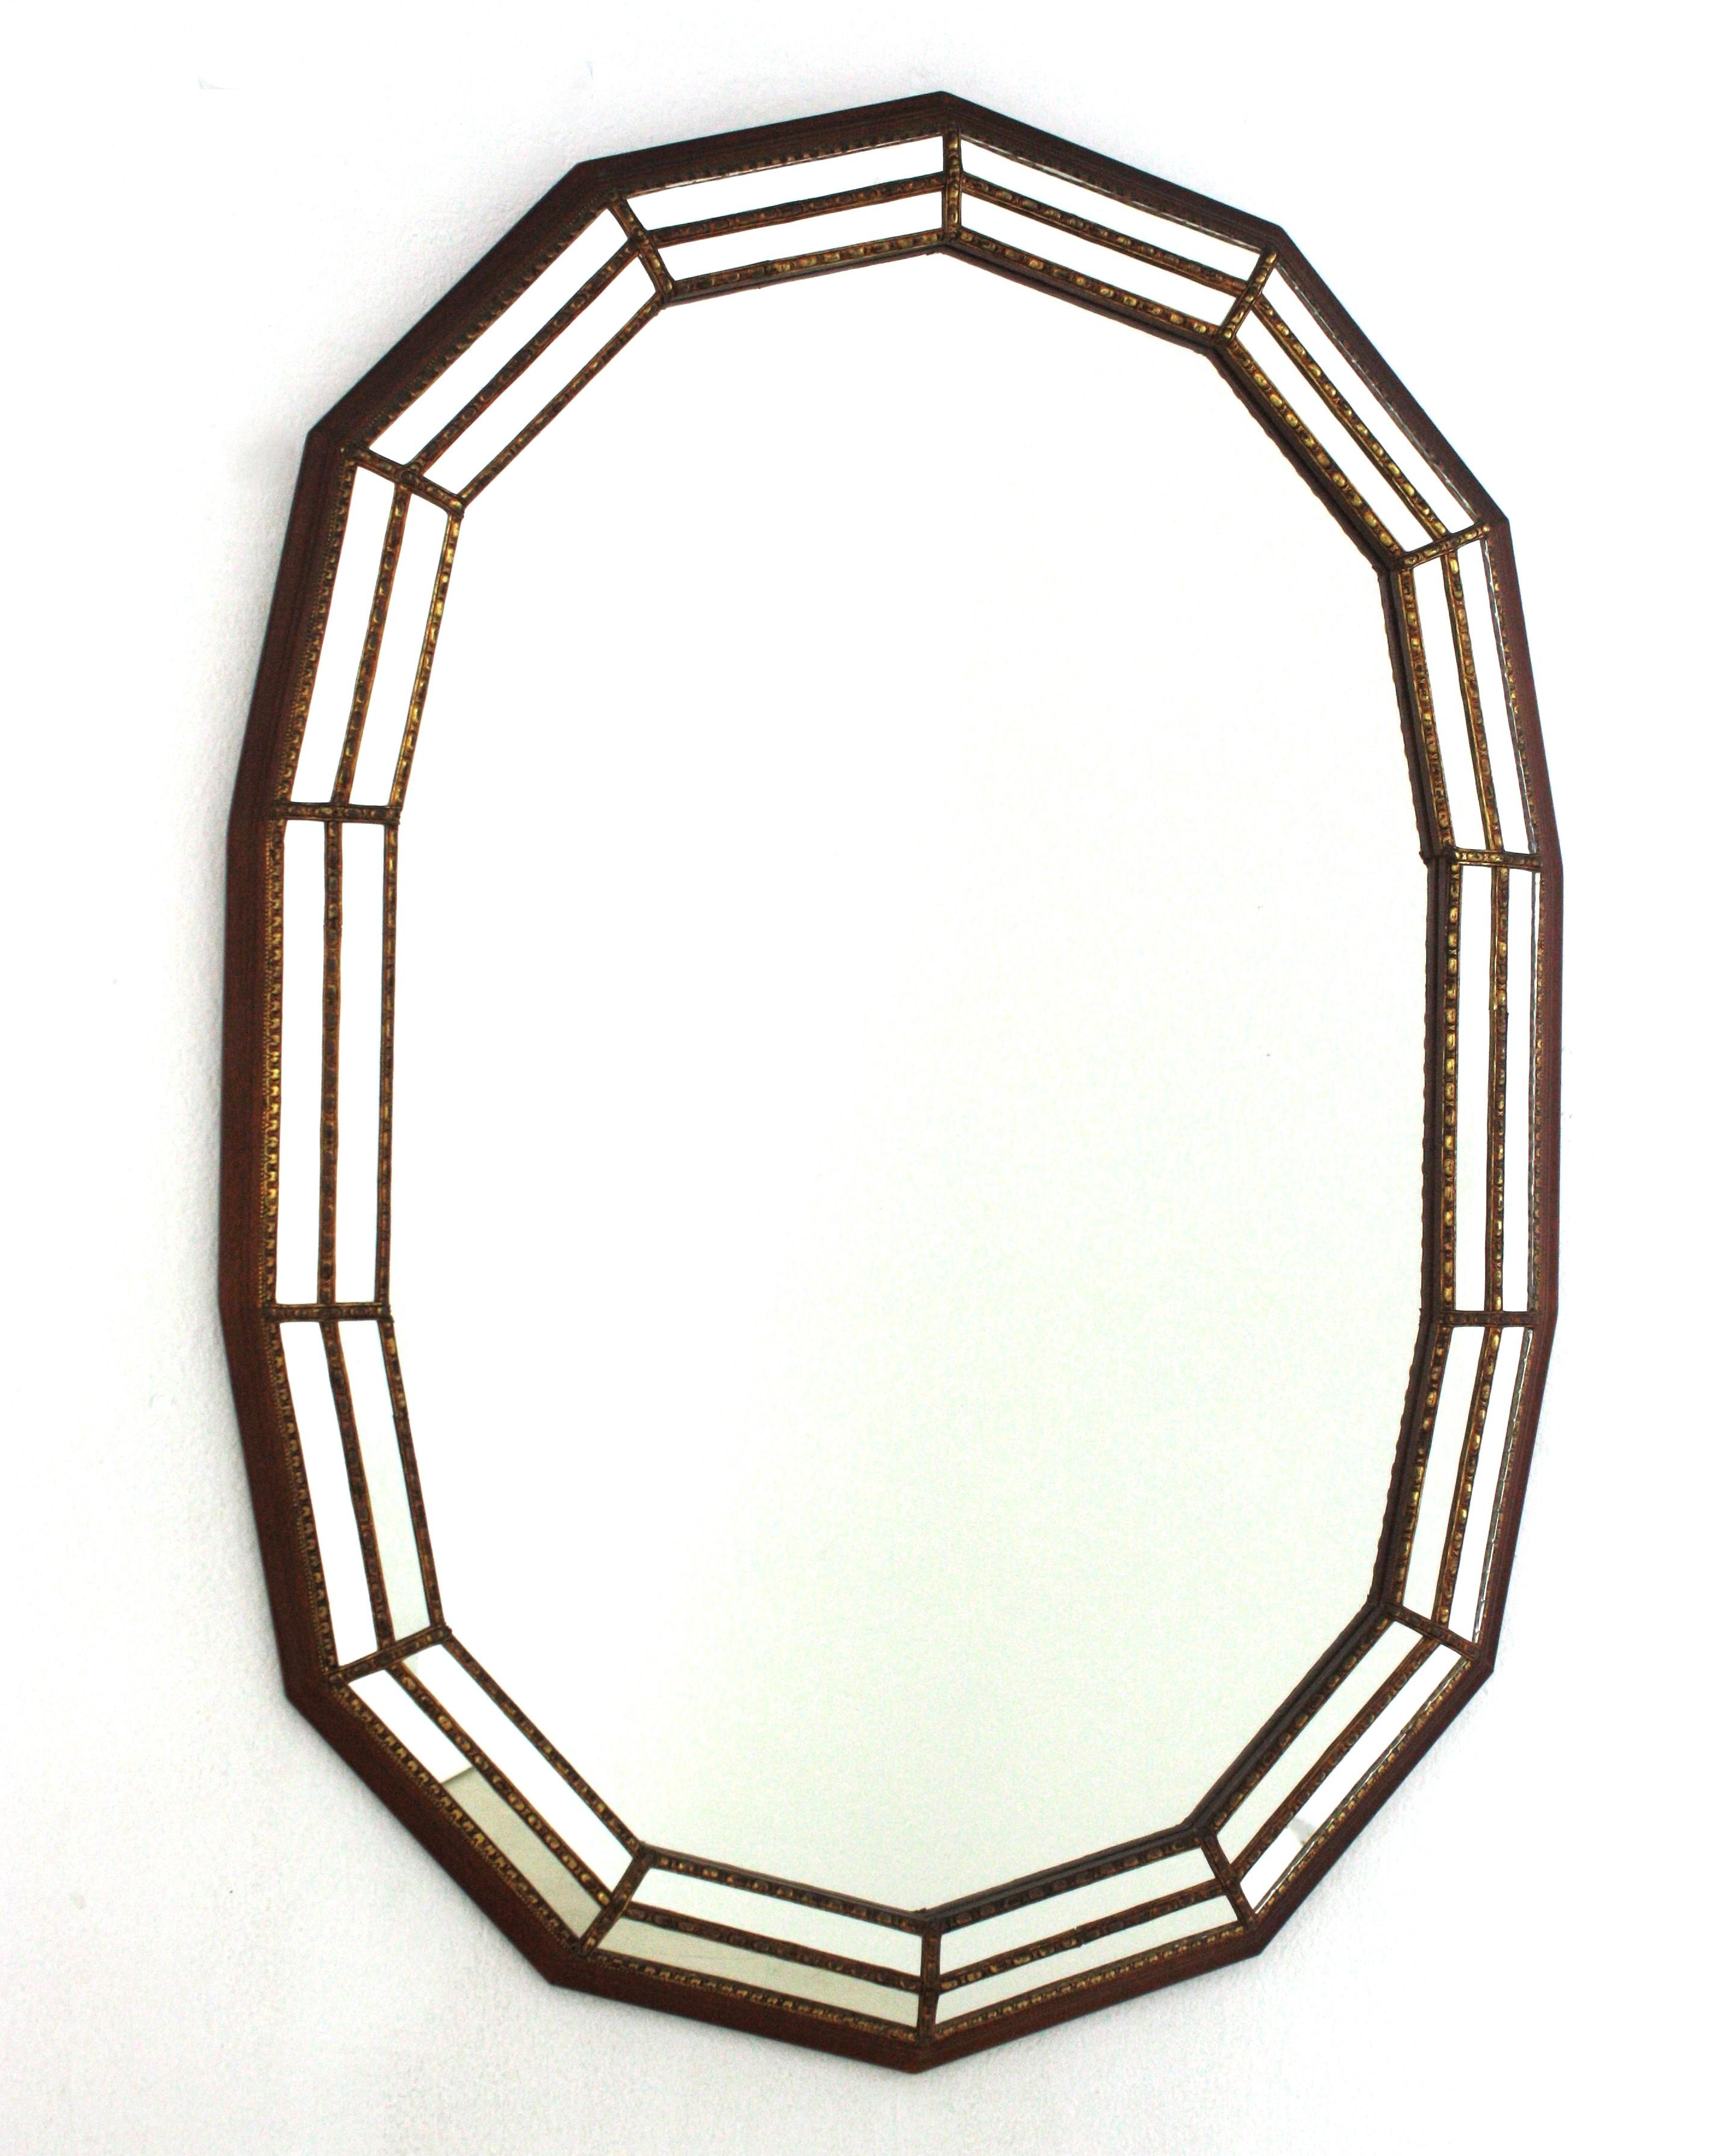 Venetian style Regency modern oval wall mirror with wood frame and brass accents, Spain, 1960s
Oval shaped mirror made of 14 sides. Triple mirror mosaic frame cased into a wood structure. The mirrored panels are adorned by brass classical